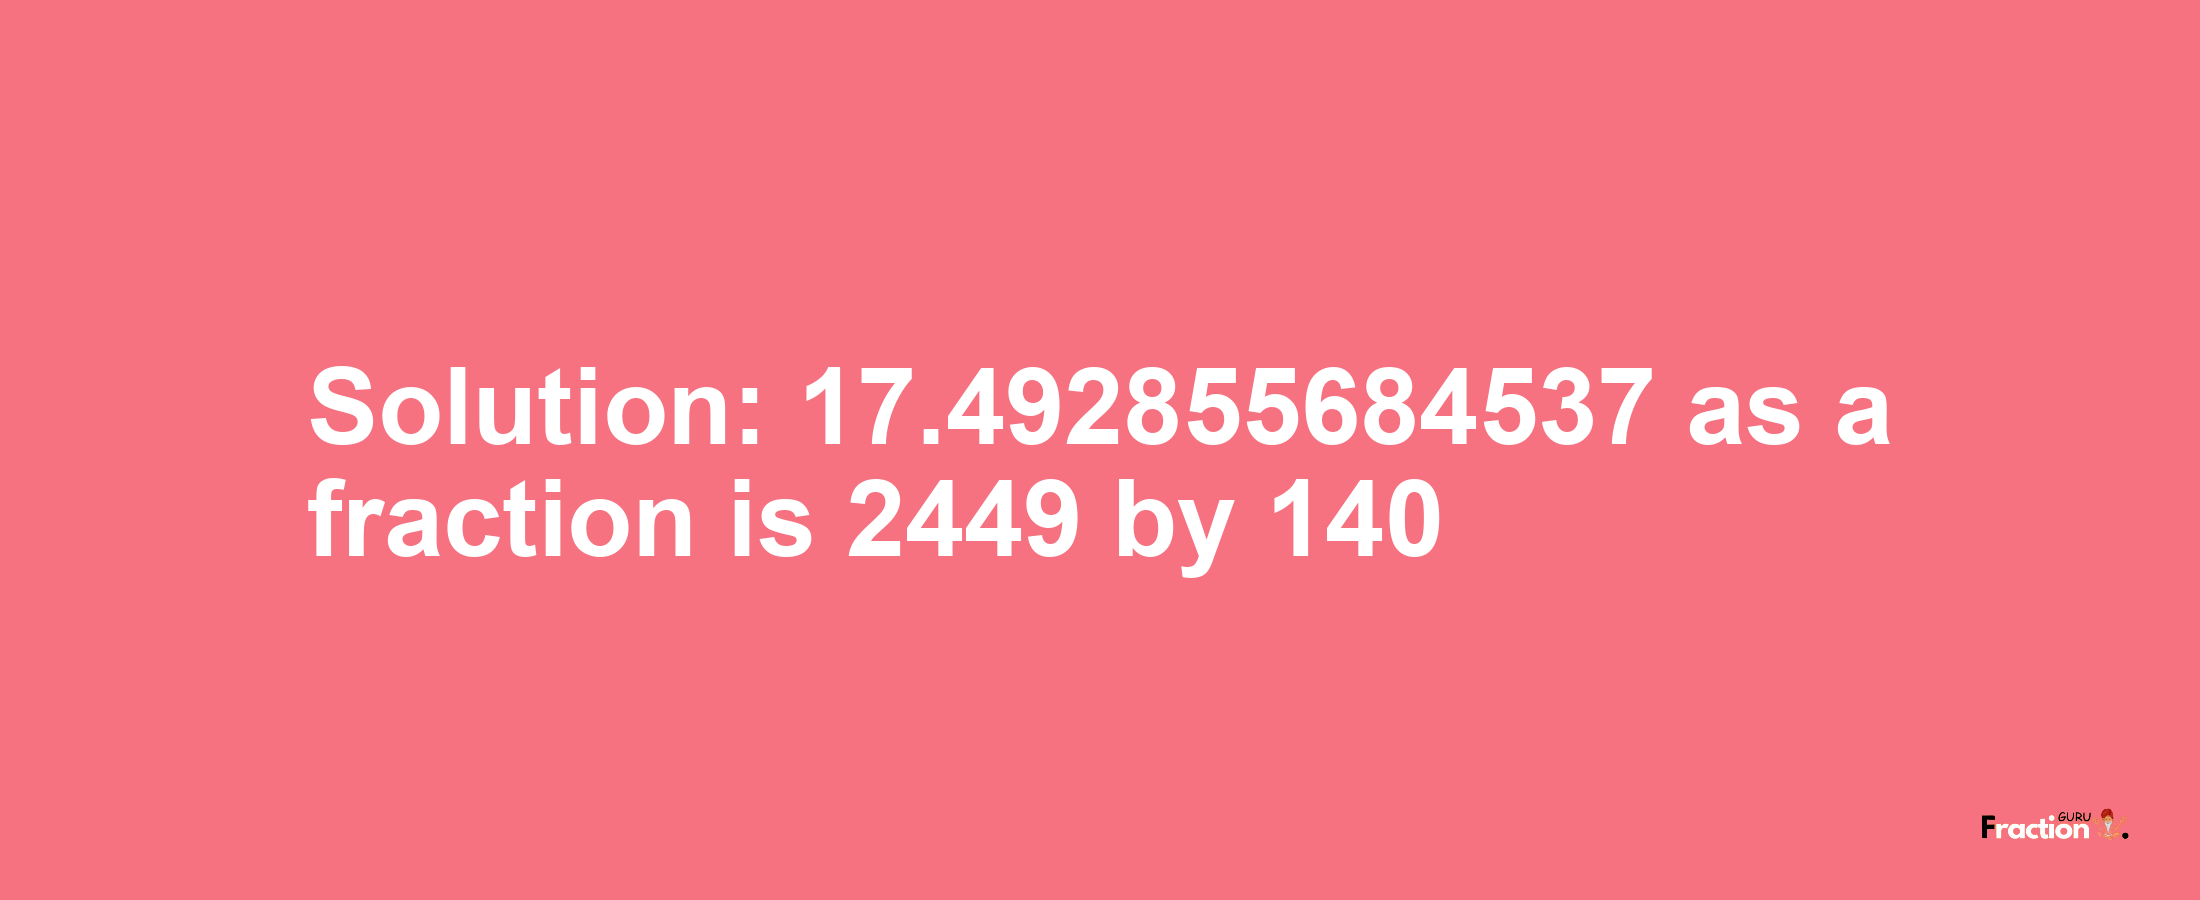 Solution:17.492855684537 as a fraction is 2449/140